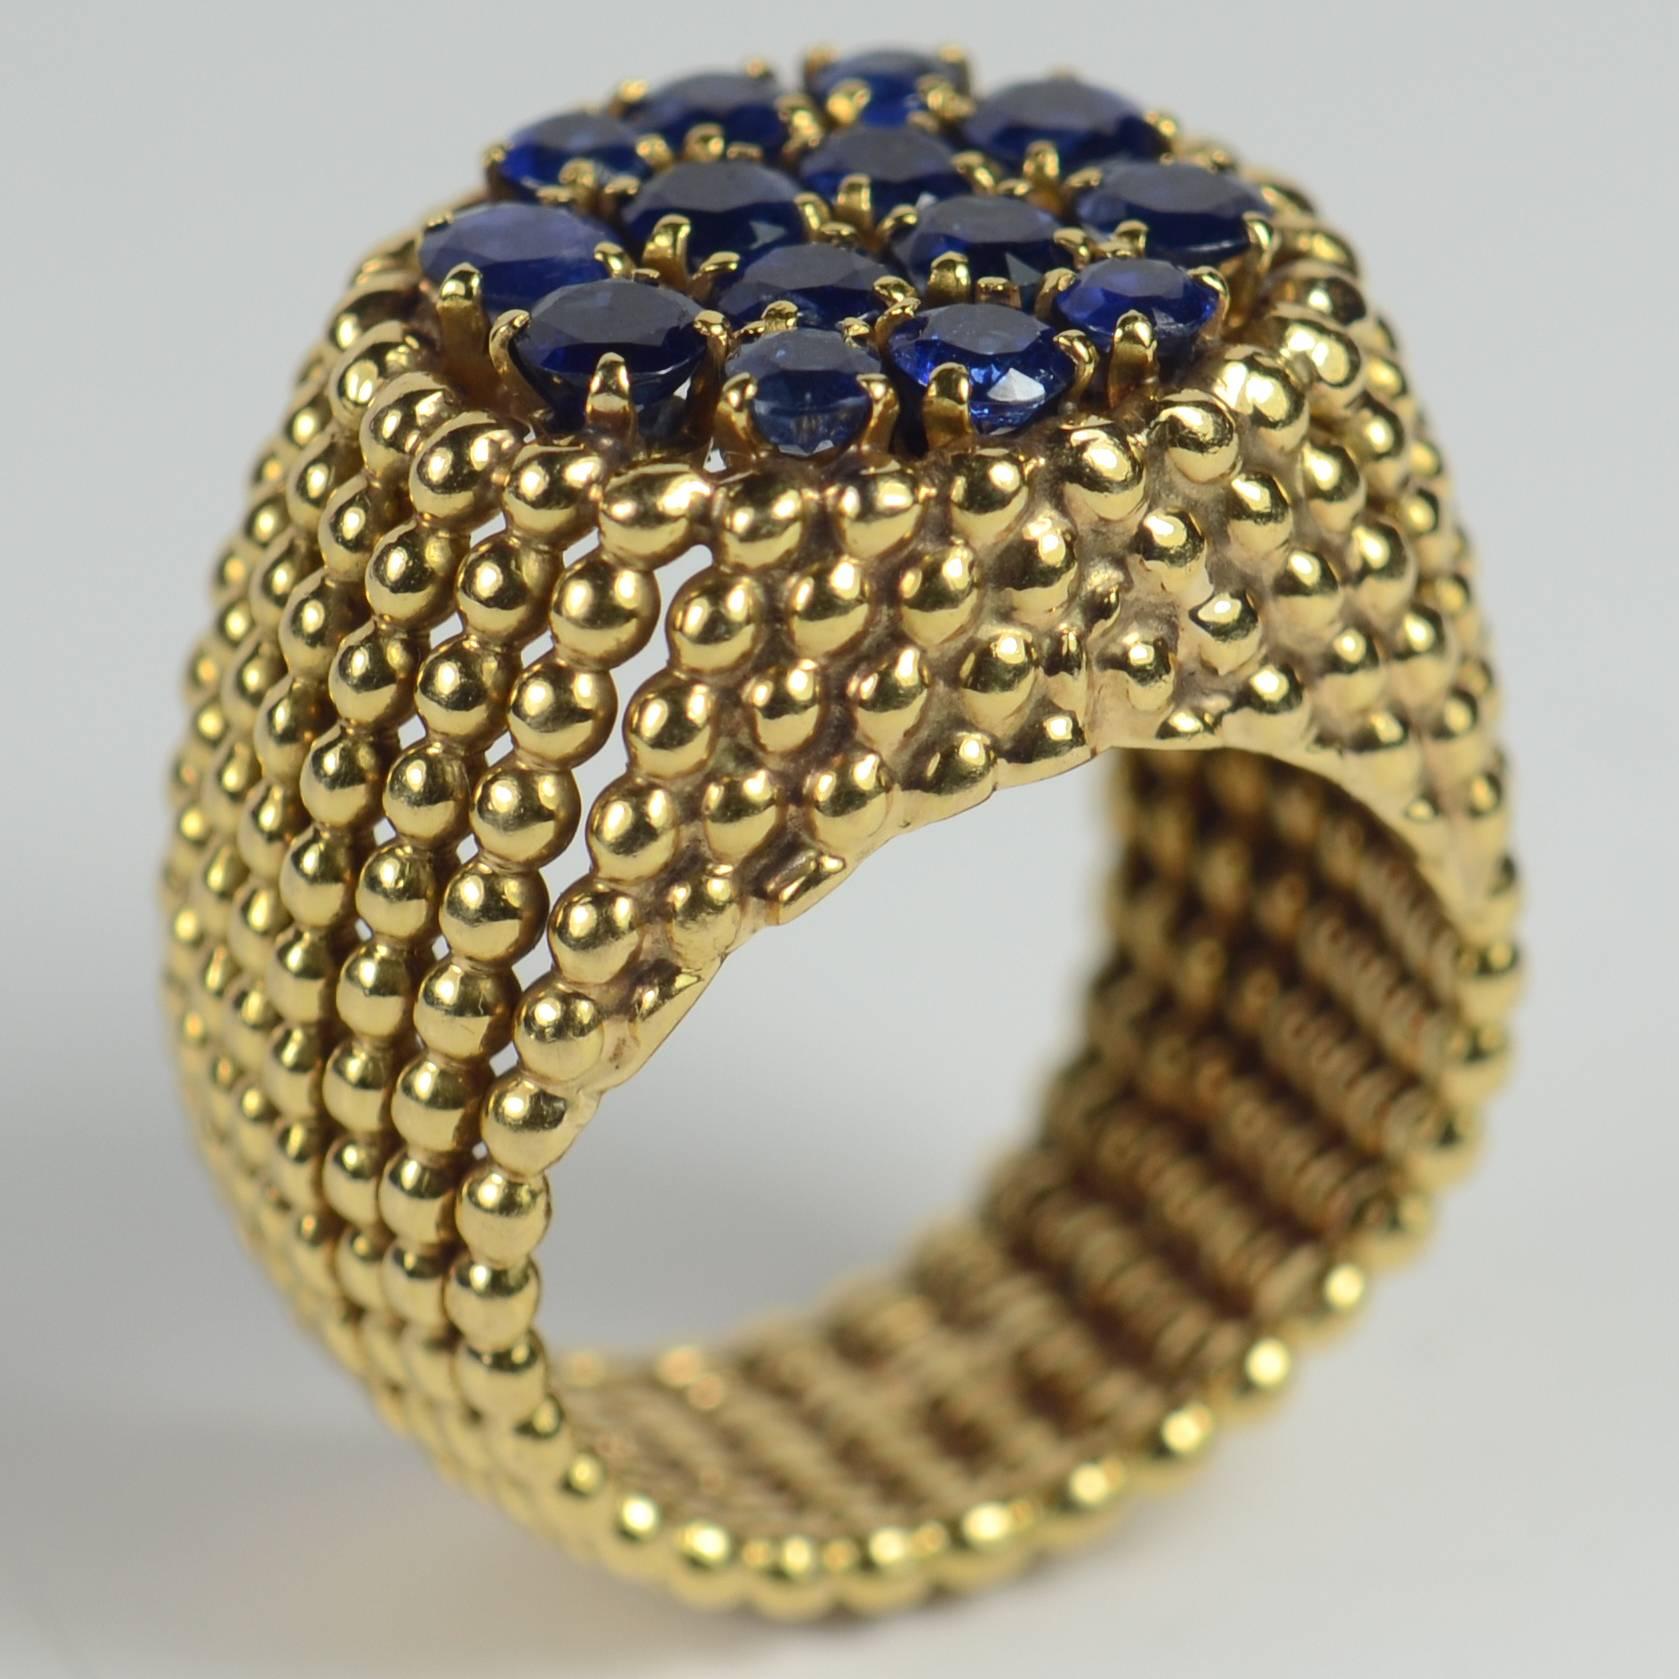 A 18 carat yellow gold ring of French manufacture designed as ridges of gold balls rising around the shank to meet a flat plaque set with 16 natural, unheated round-cut sapphires weighing approximately 2.30 carats in total.

The ring is stamped with